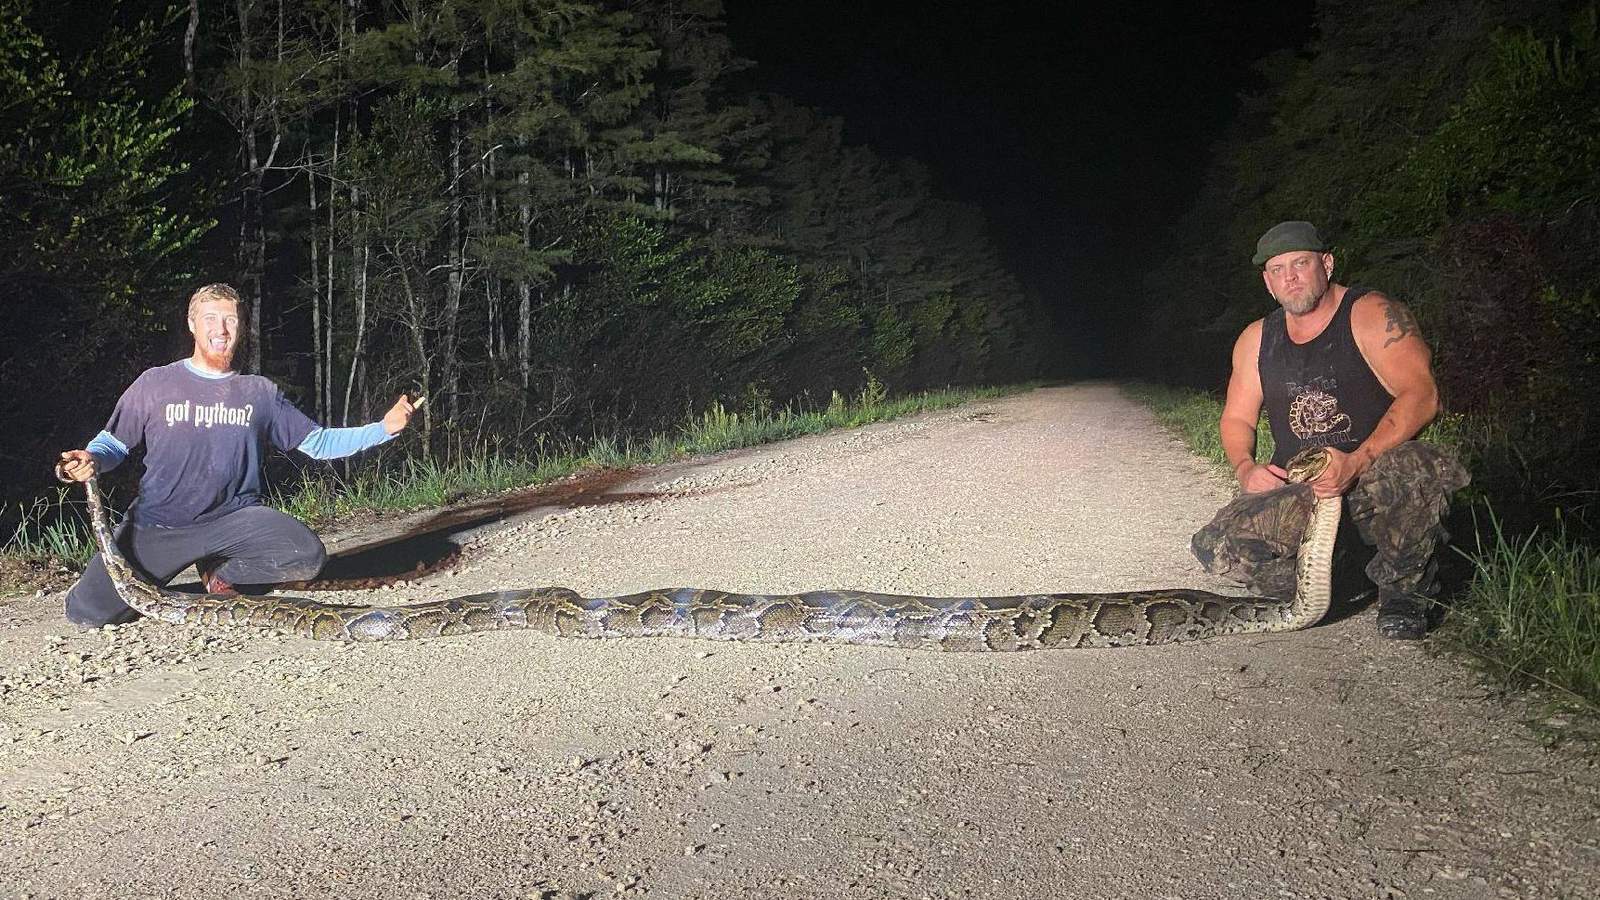 Record-setting 18-foot, 104-pound Burmese python captured in Everglades